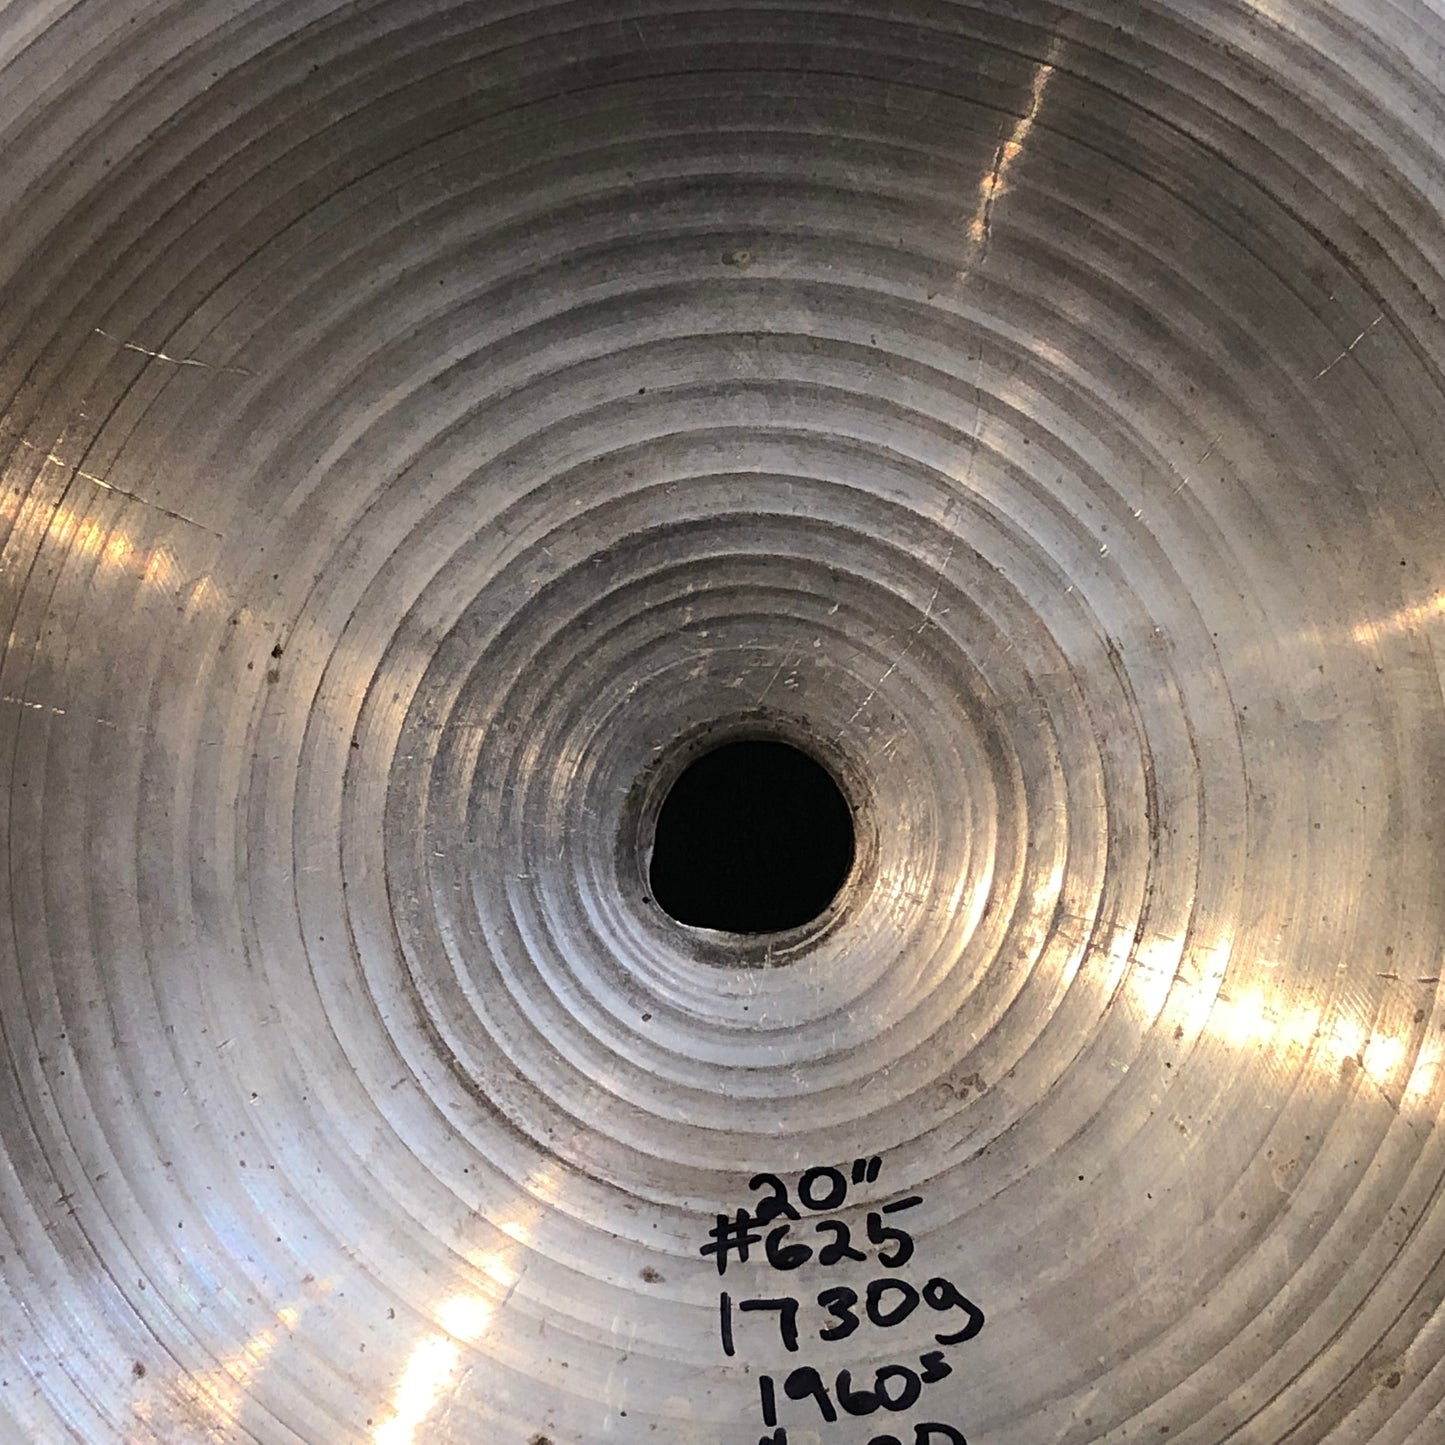 20" Paiste 1960s Ludwig Standard Ride Cymbal 1730g #625 *Video Demo*